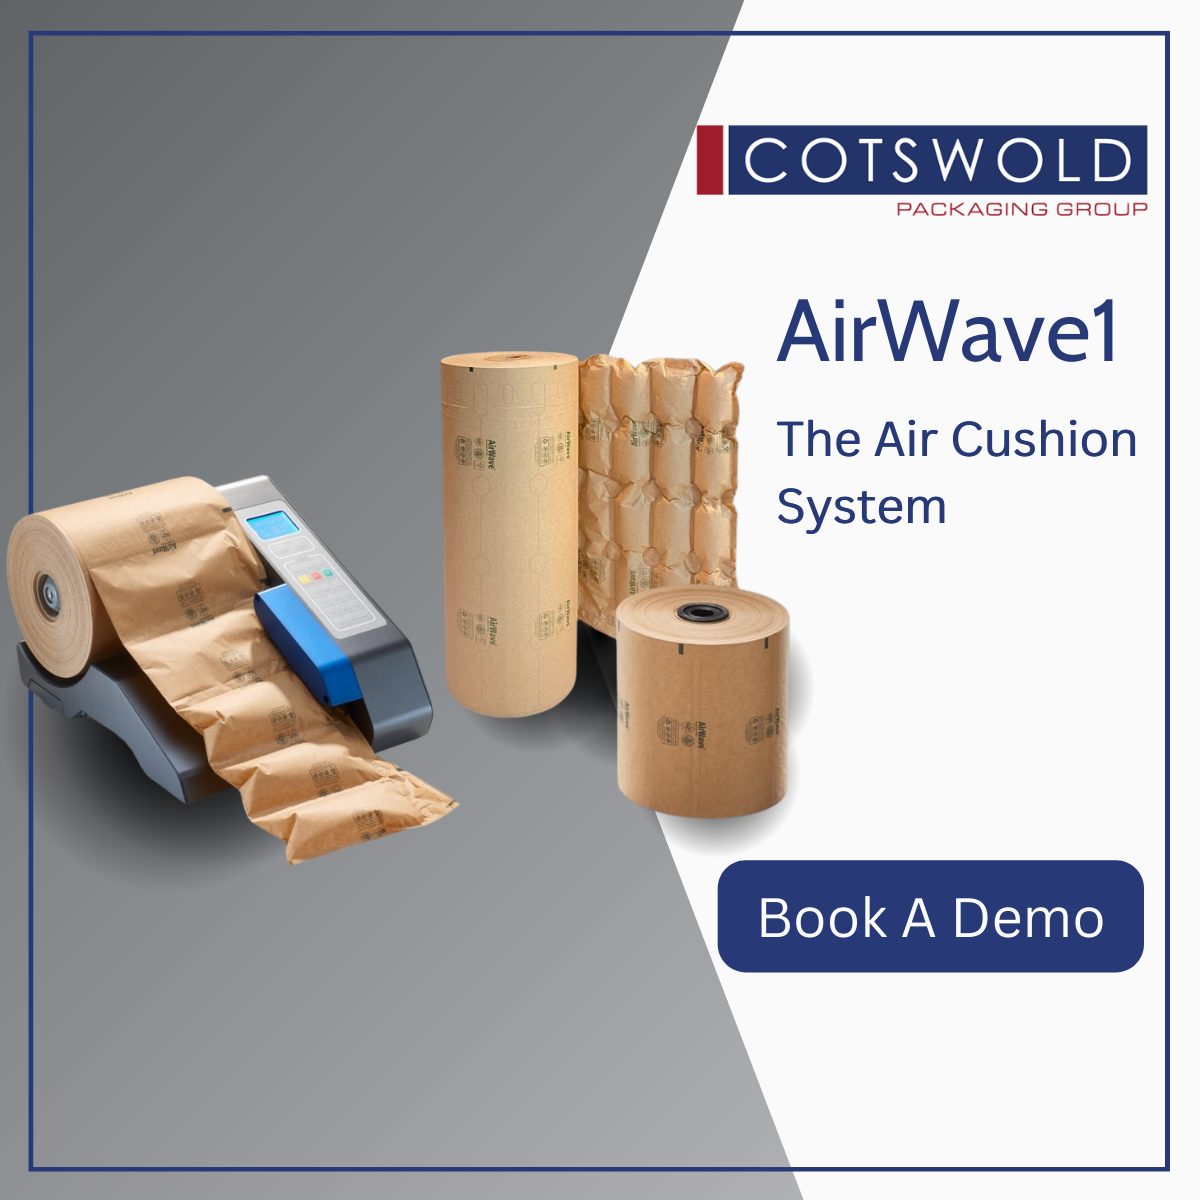 Discover the Power of the AirWave 1 Air Cushion System